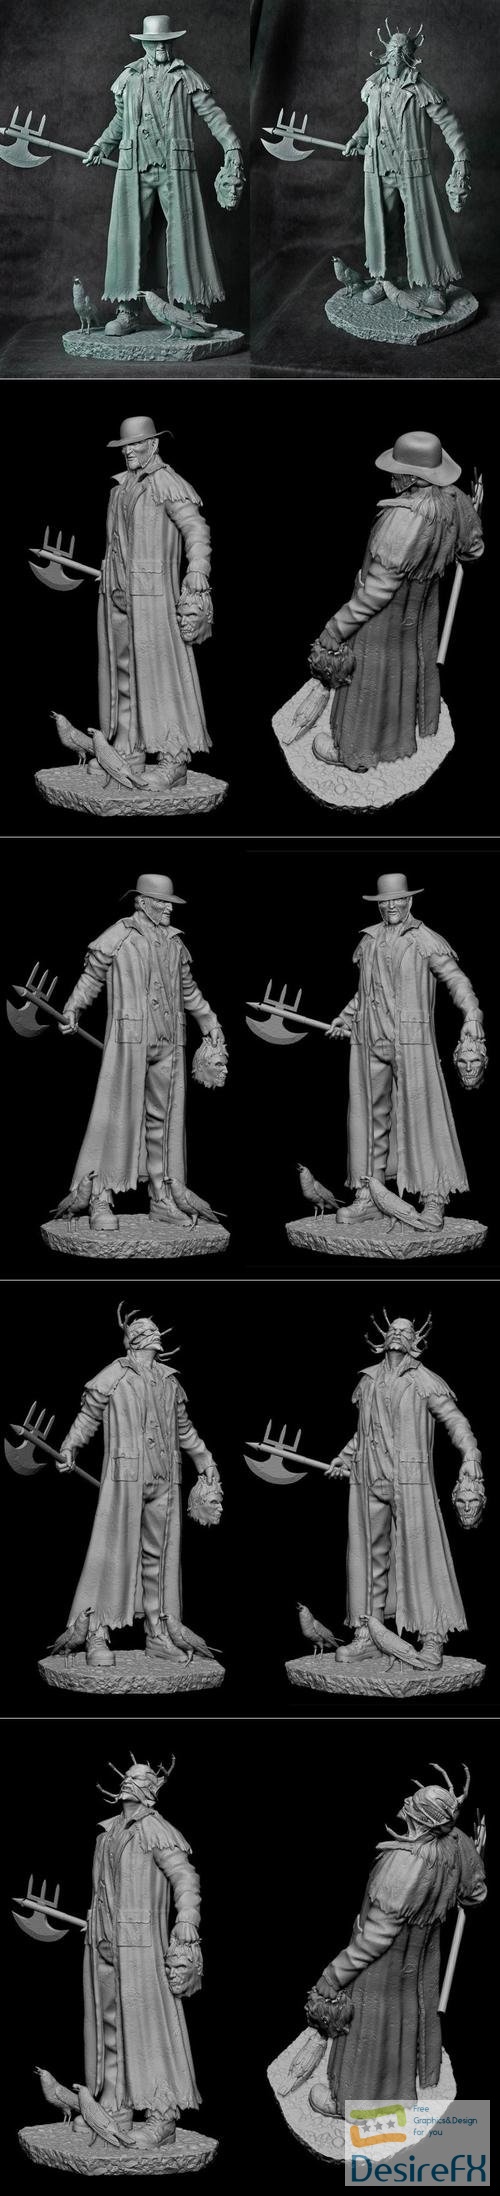 Jeepers Creepers - Alterton – 3D Print